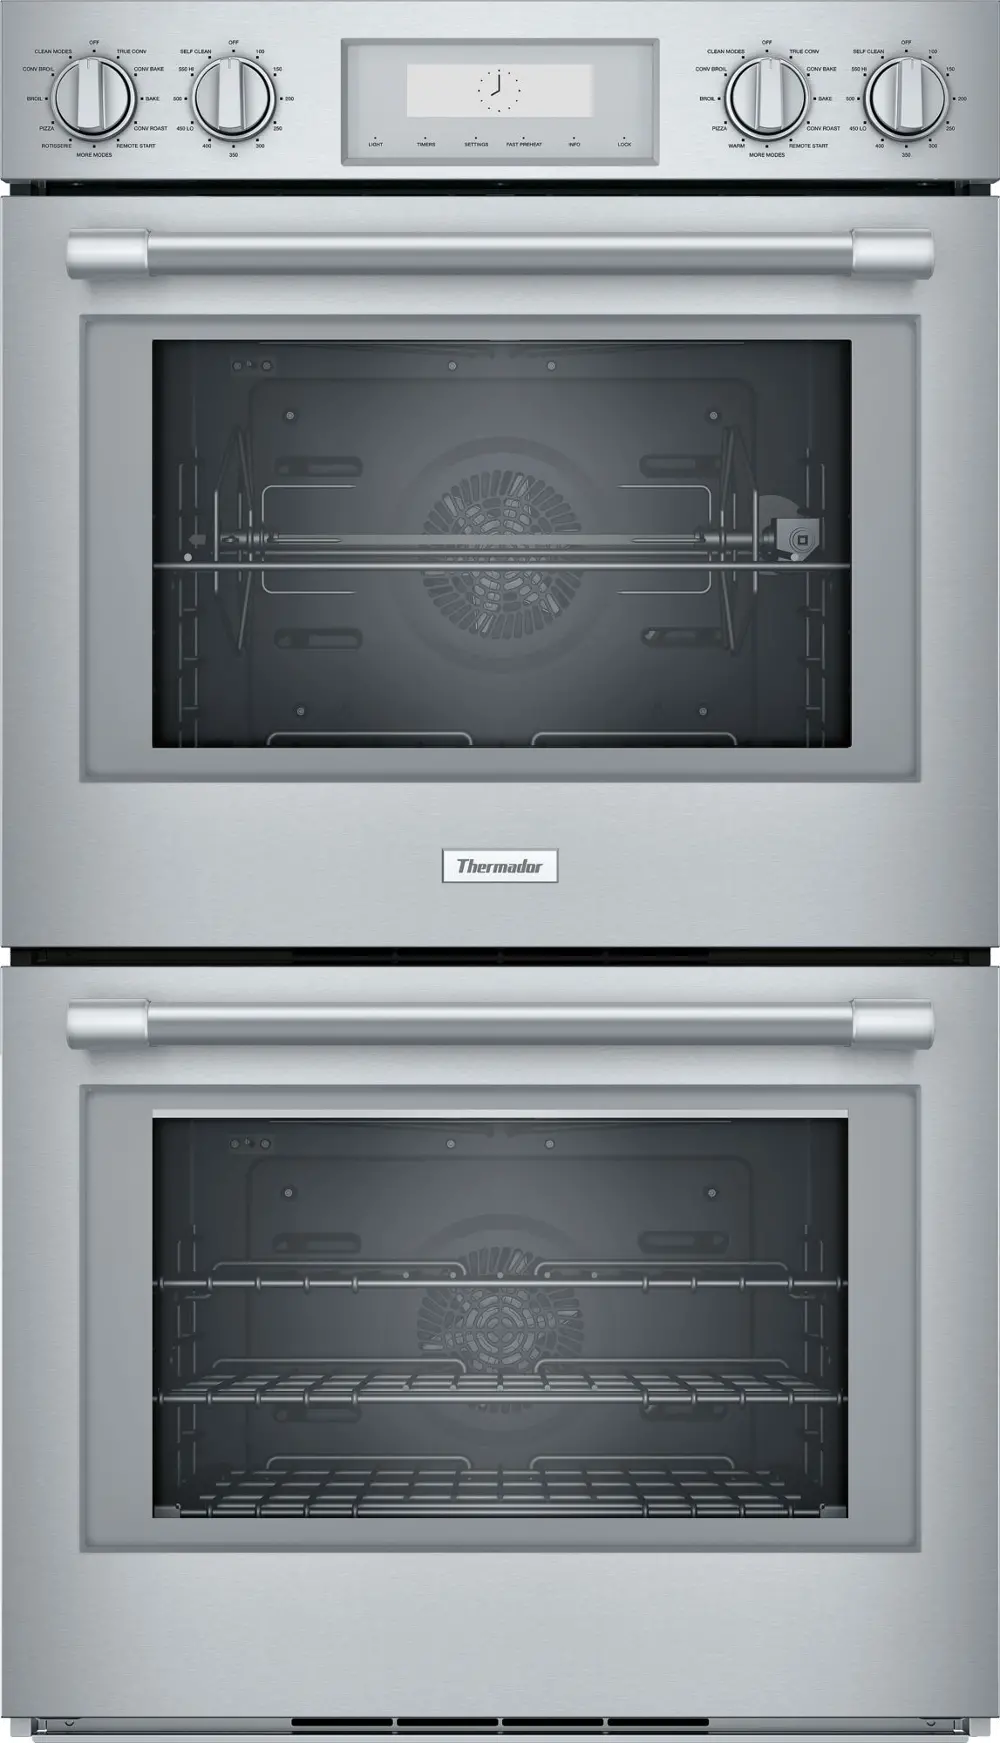 POD302W Thermador 7.3 cu ft Double Wall Oven - Stainless Steel 30 Inch-1